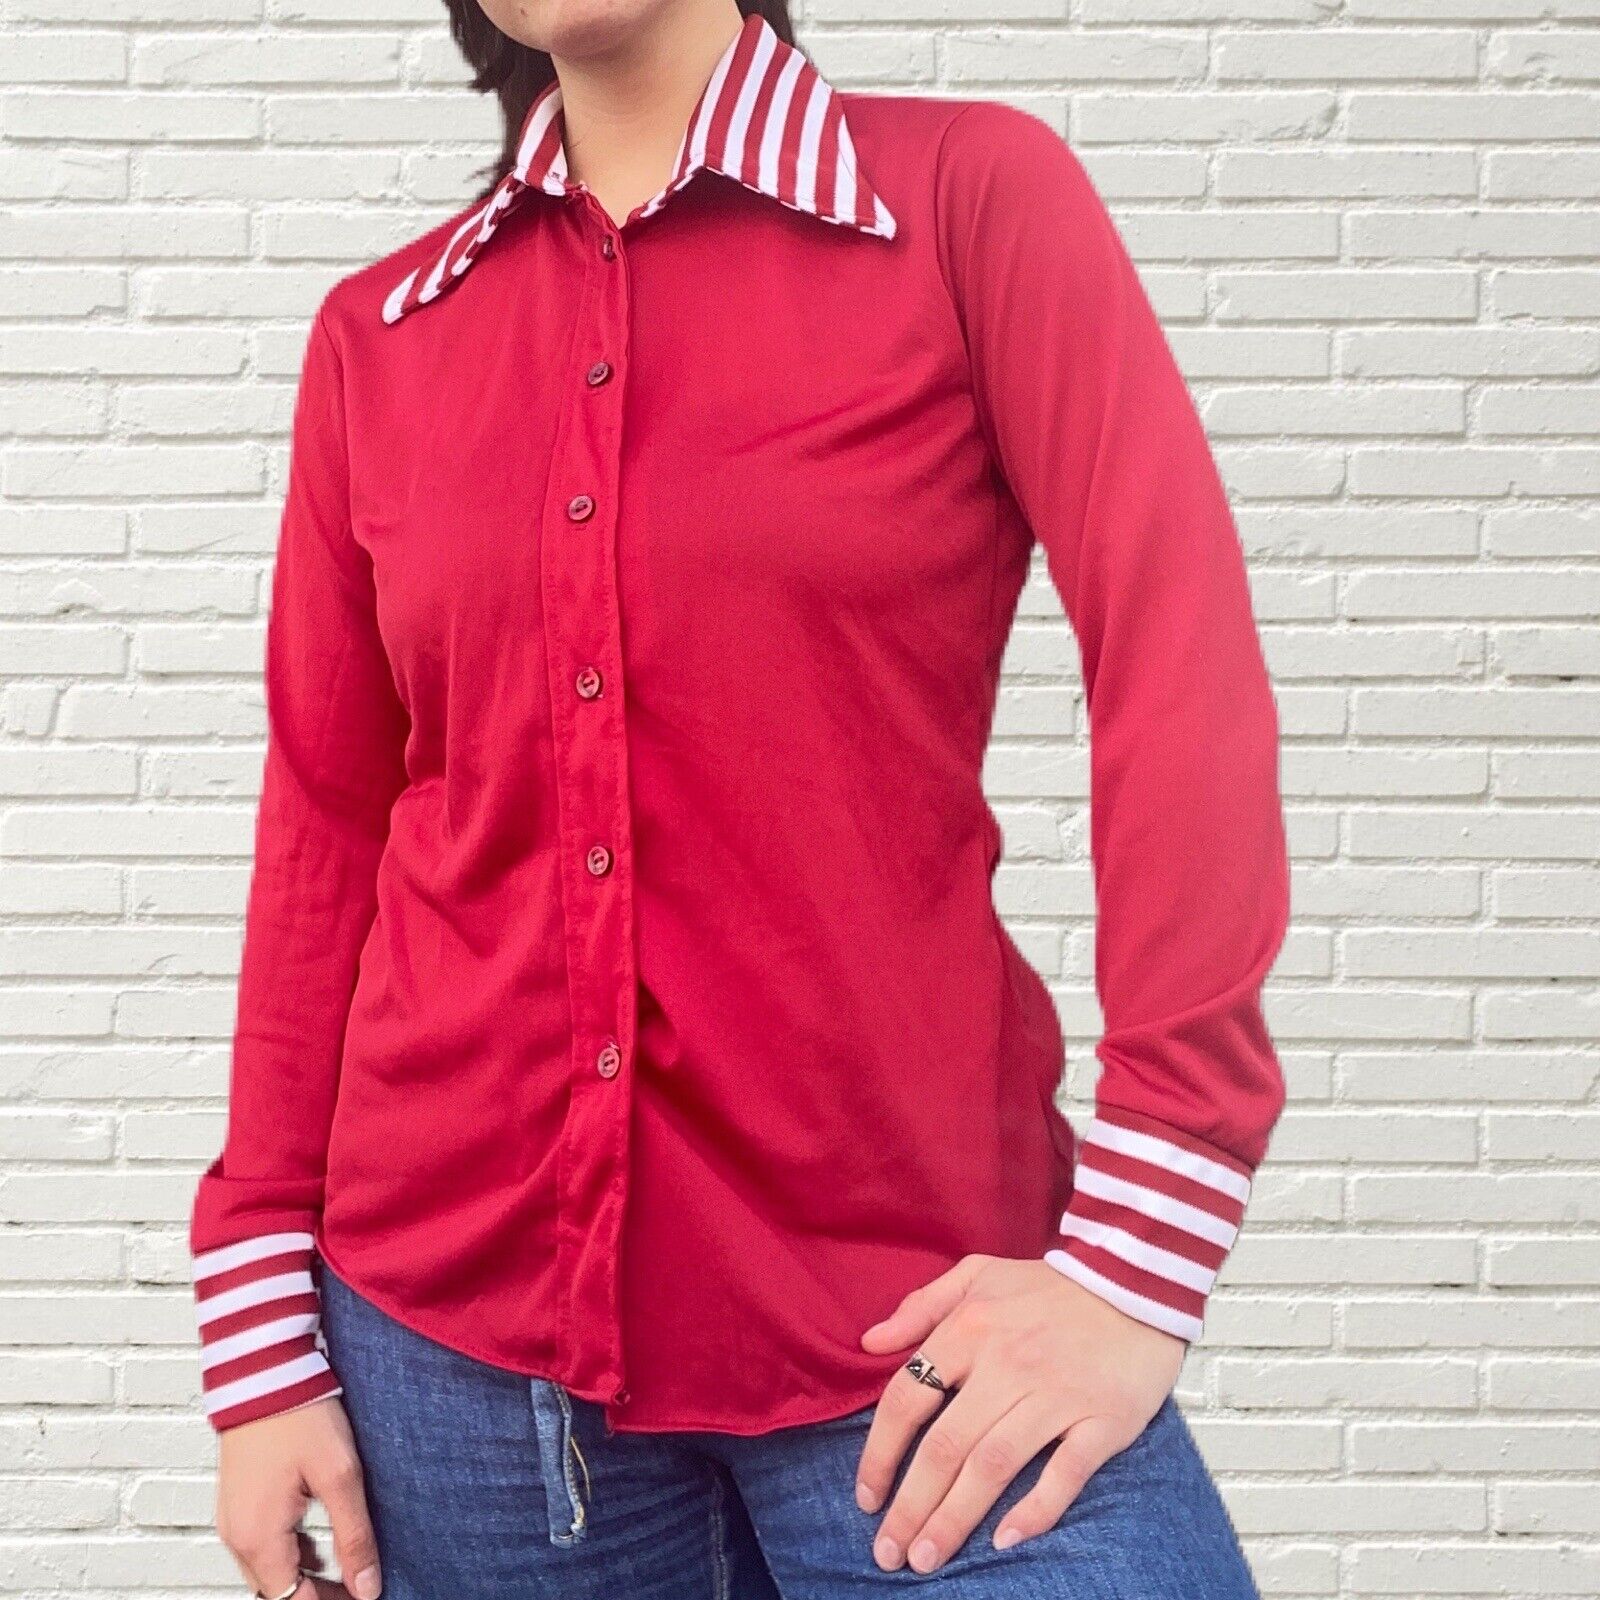 Vintage 70’s Button Up Shirt Blouse - Red Mesh, C… - image 2